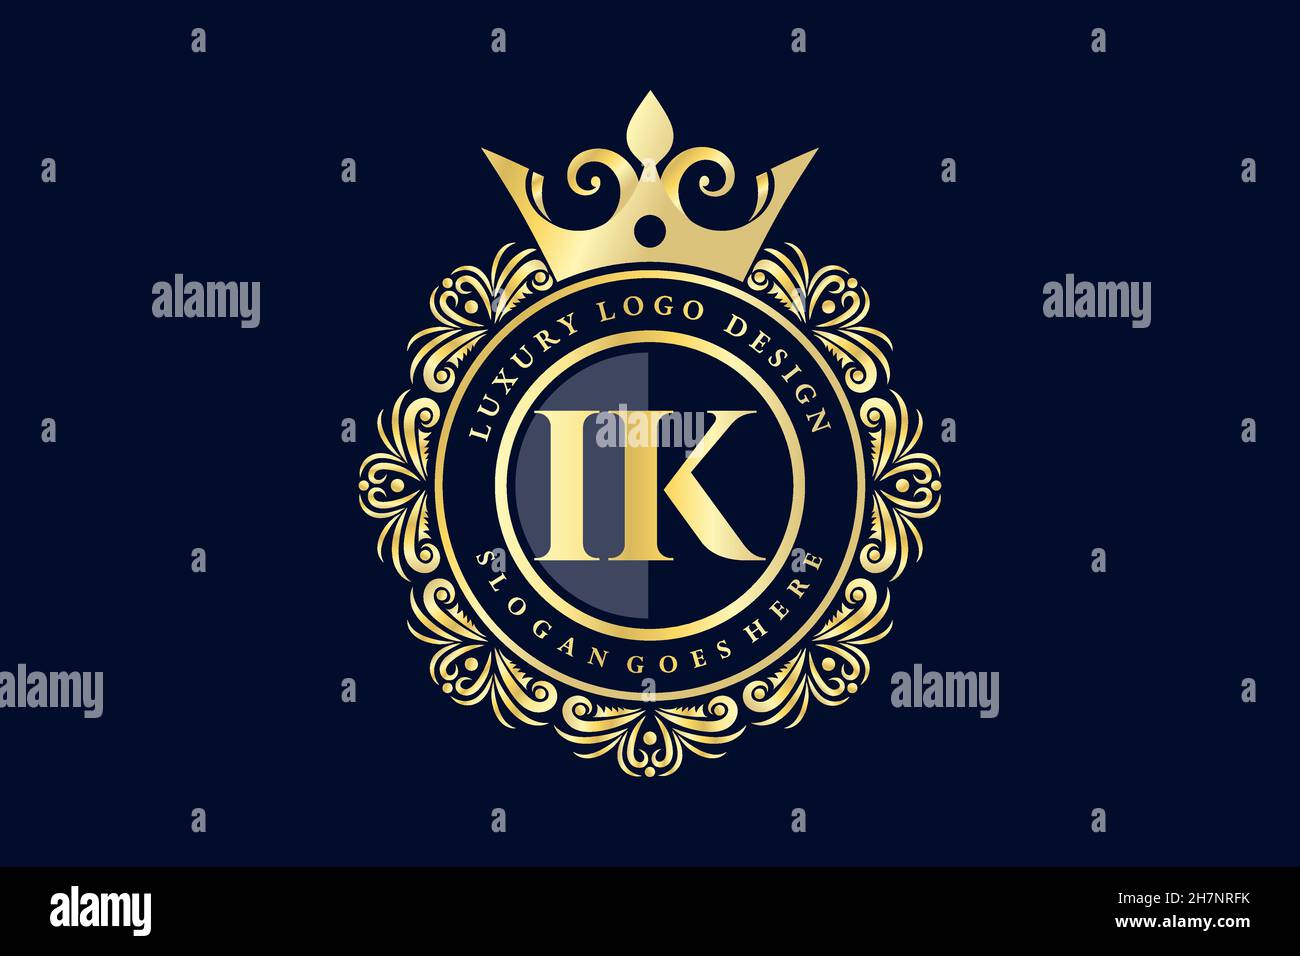 Ik Logo Photos and Images & Pictures